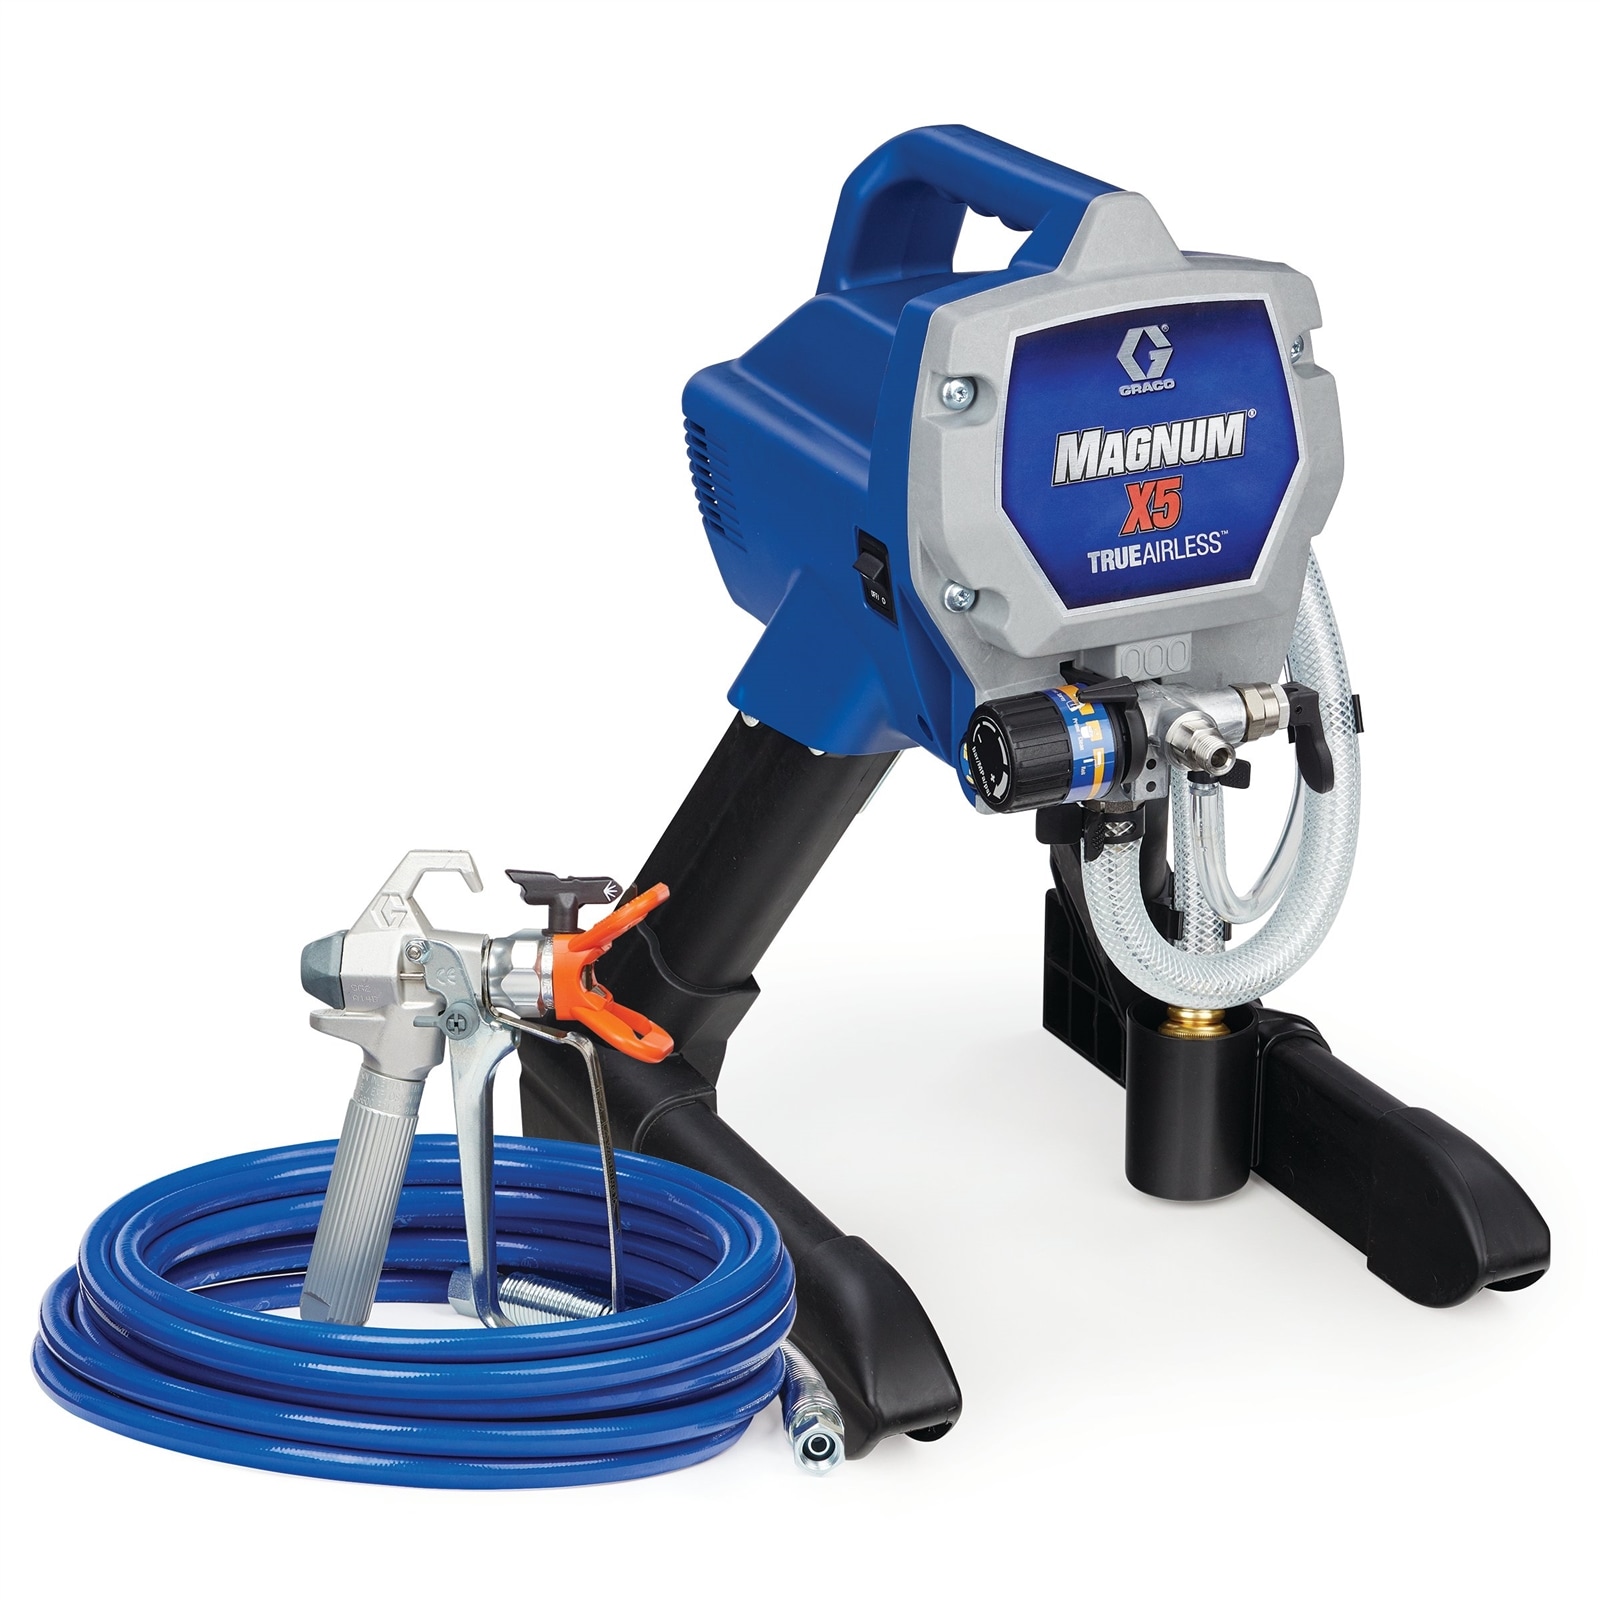 Graco Project Painter Plus Airless Paint Sprayer and Accessories Kit